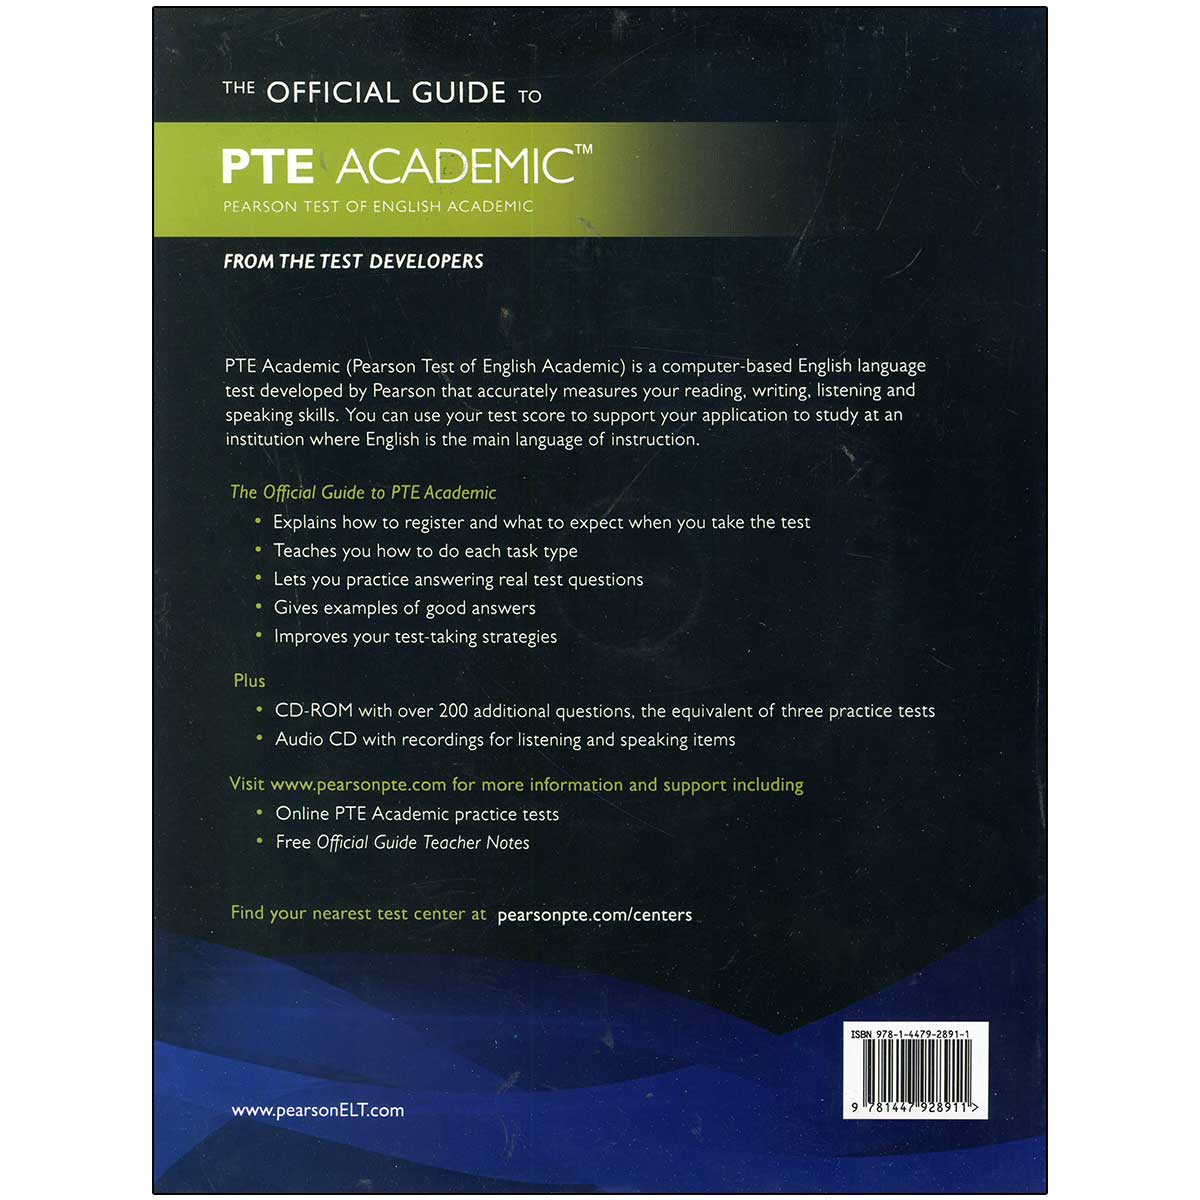 The-Official-Guide-to-the-PTE-Academic-back